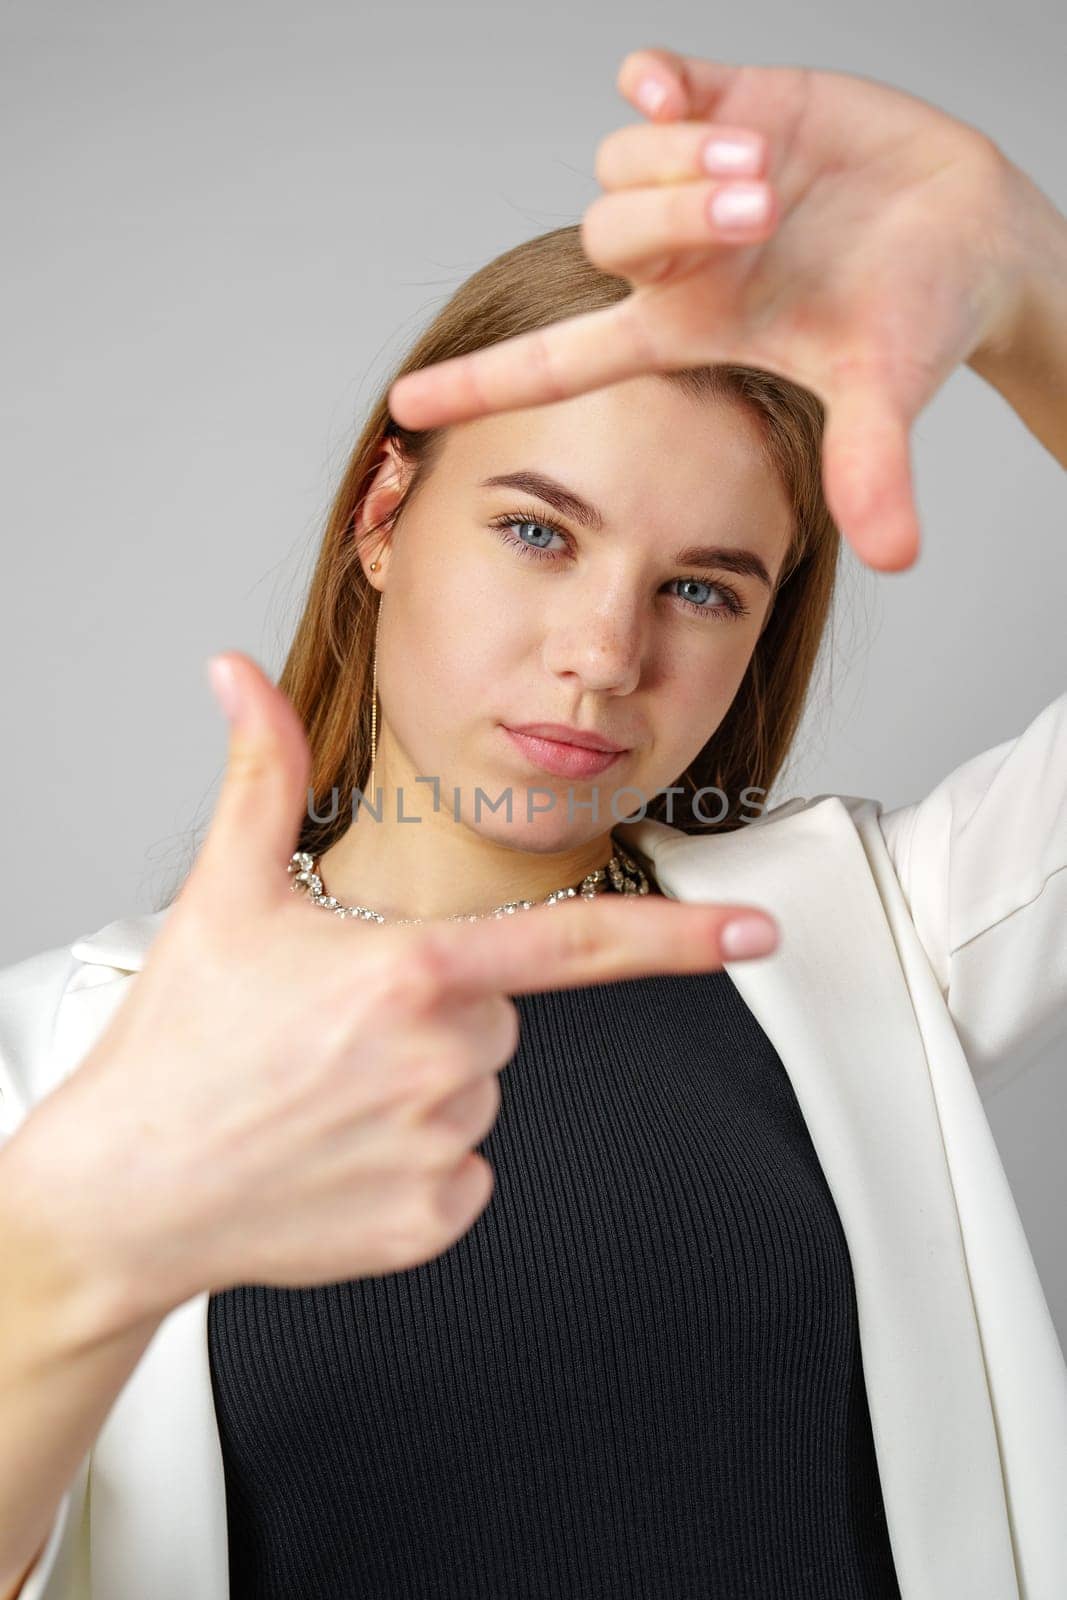 Young Woman Making Frame Gesture With Hands Against a Neutral Background by Fabrikasimf